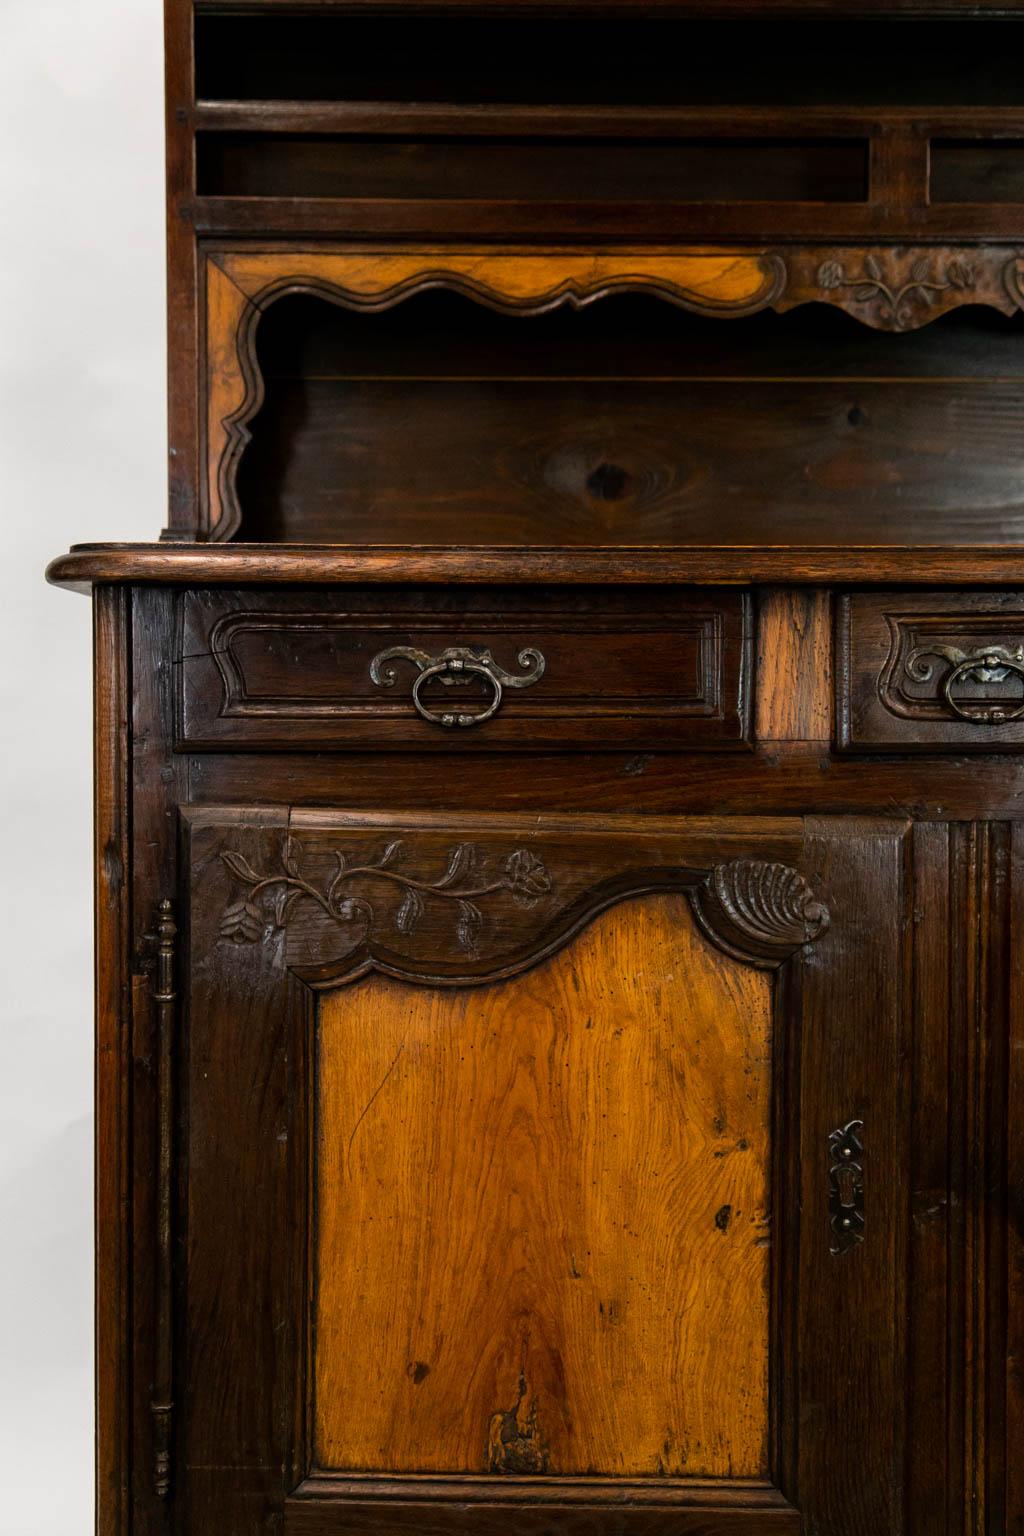 The top of this oak vassiliere has a carved arch and central apron. The doors are carved oak with recessed fruitwood.